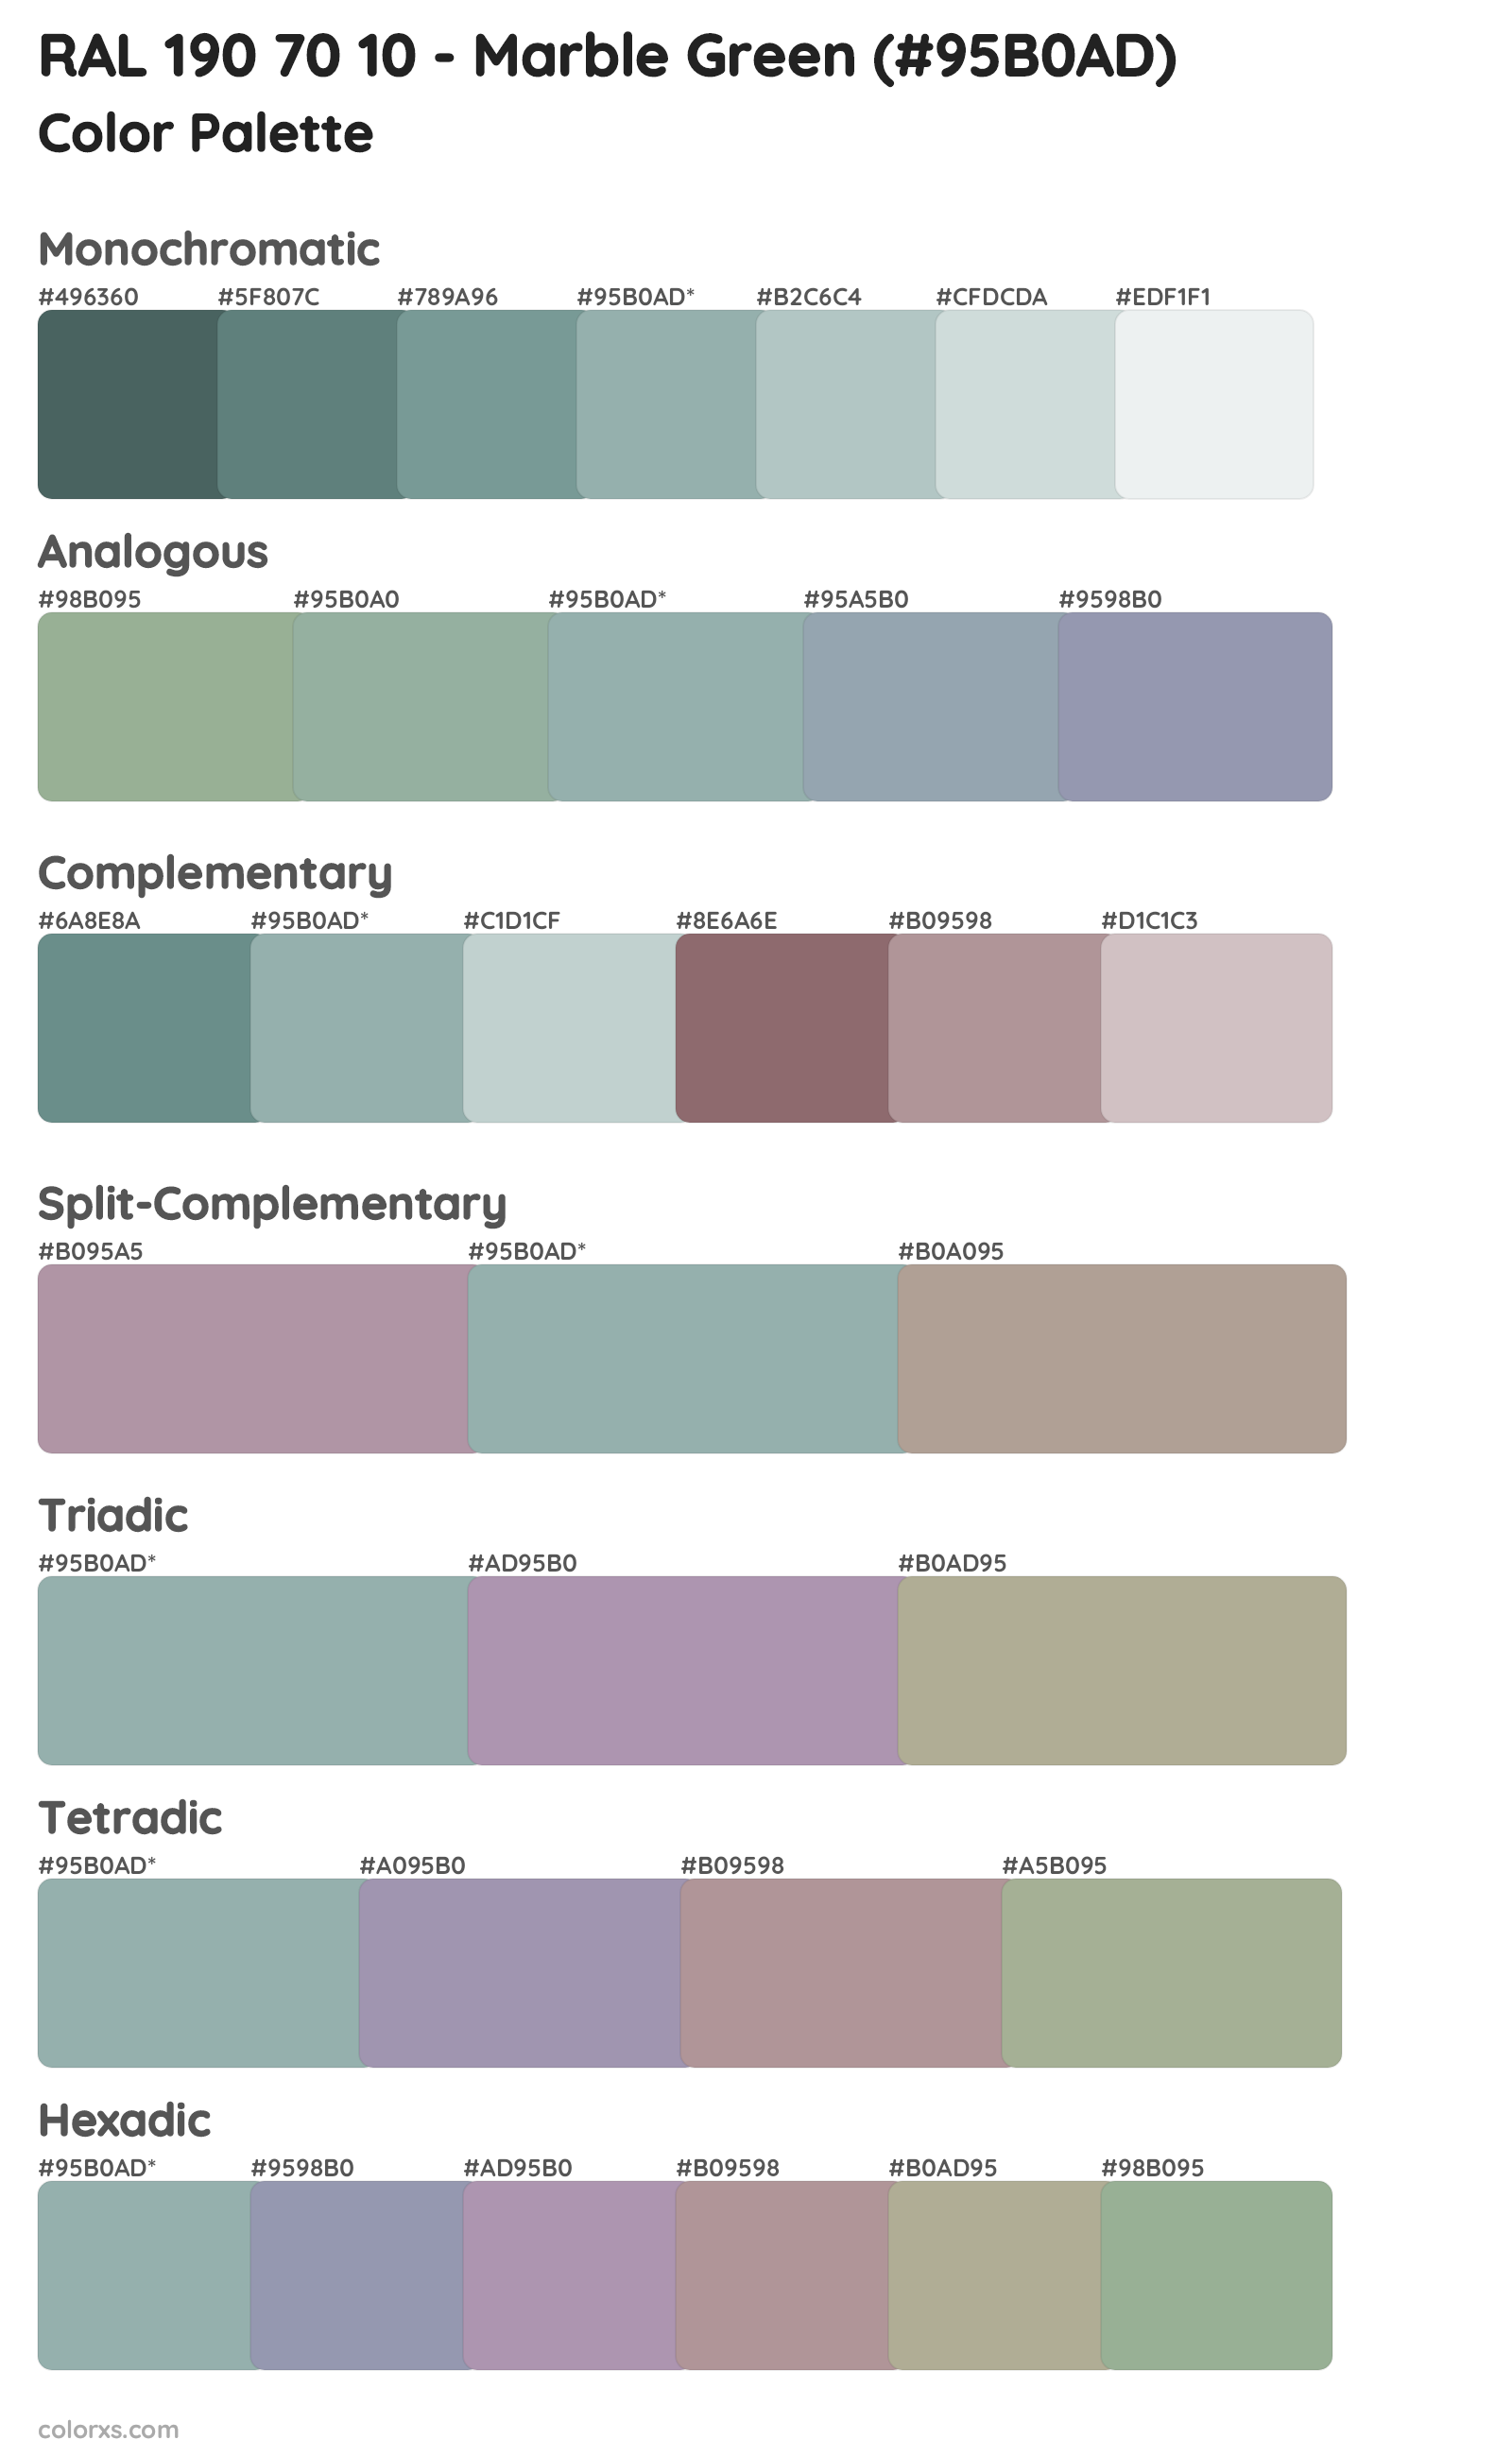 RAL 190 70 10 - Marble Green Color Scheme Palettes